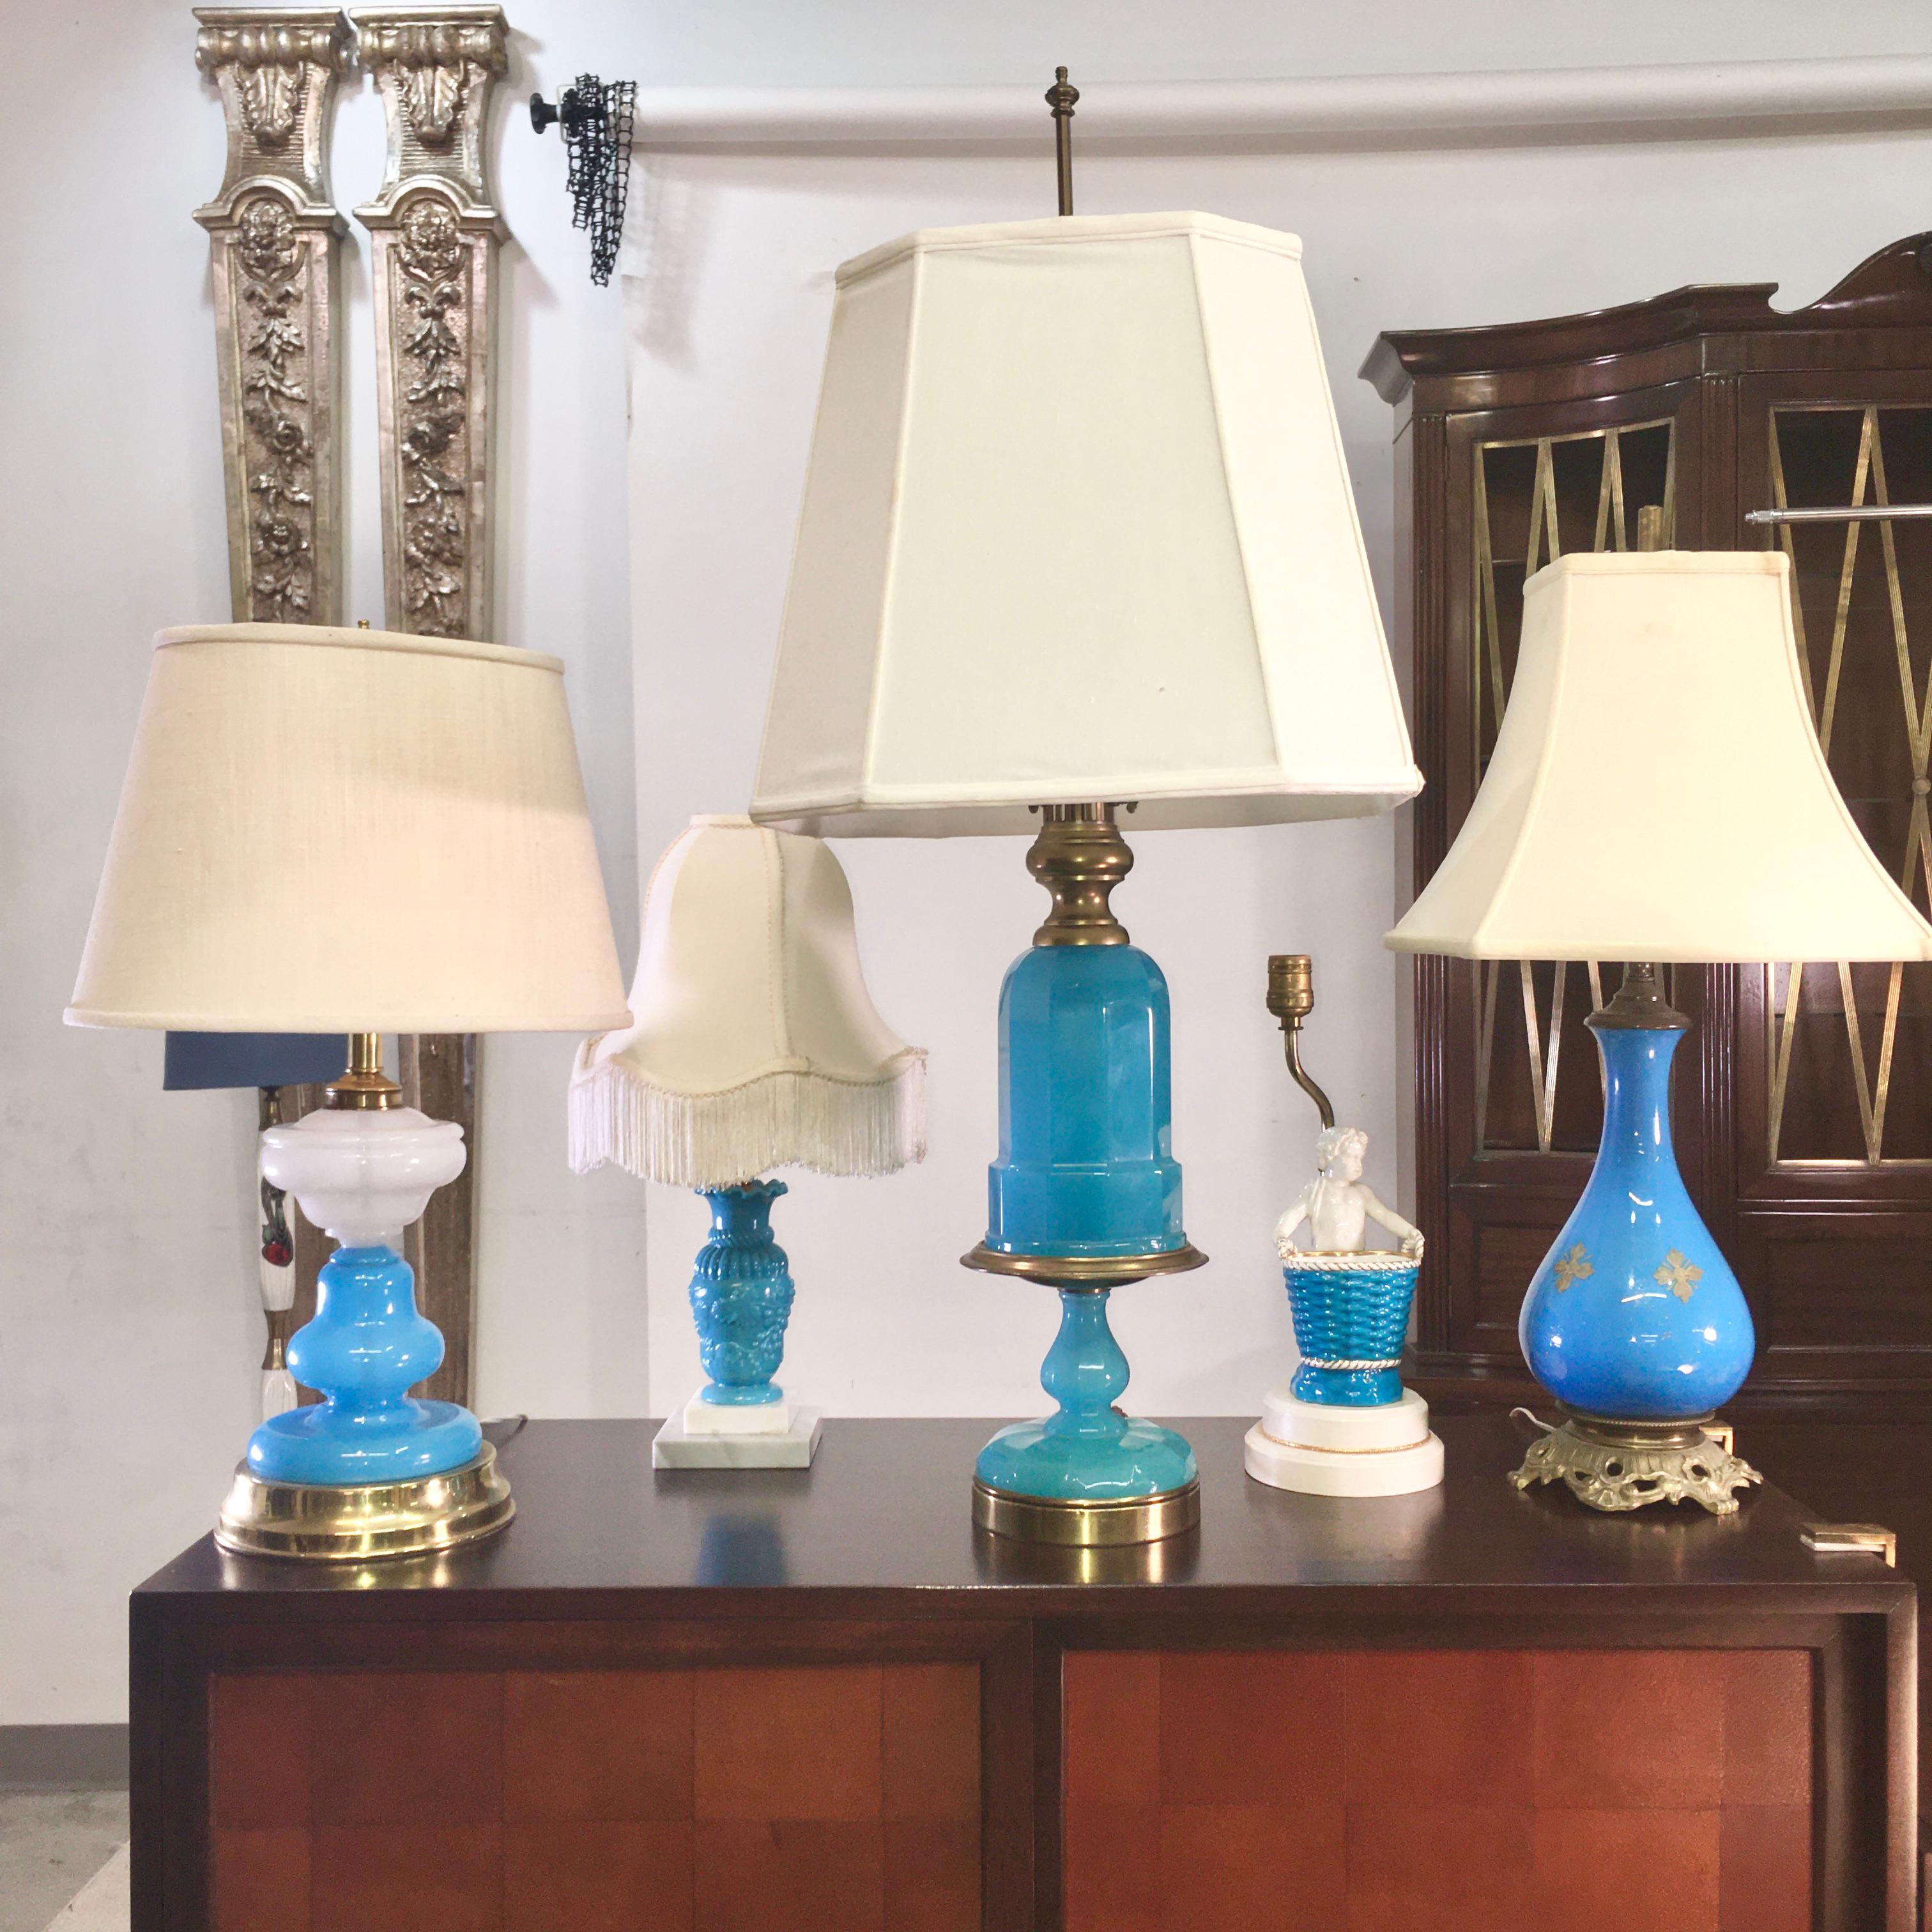 Unique grouping of five lamps from the mid-20th century in complementary shades of blue, the largest of which is a turquoise blue opaline Cenedese glass lamp mounted on gilt brass.
All of these are from the estate of Sarasota artist Miriam Shorr.